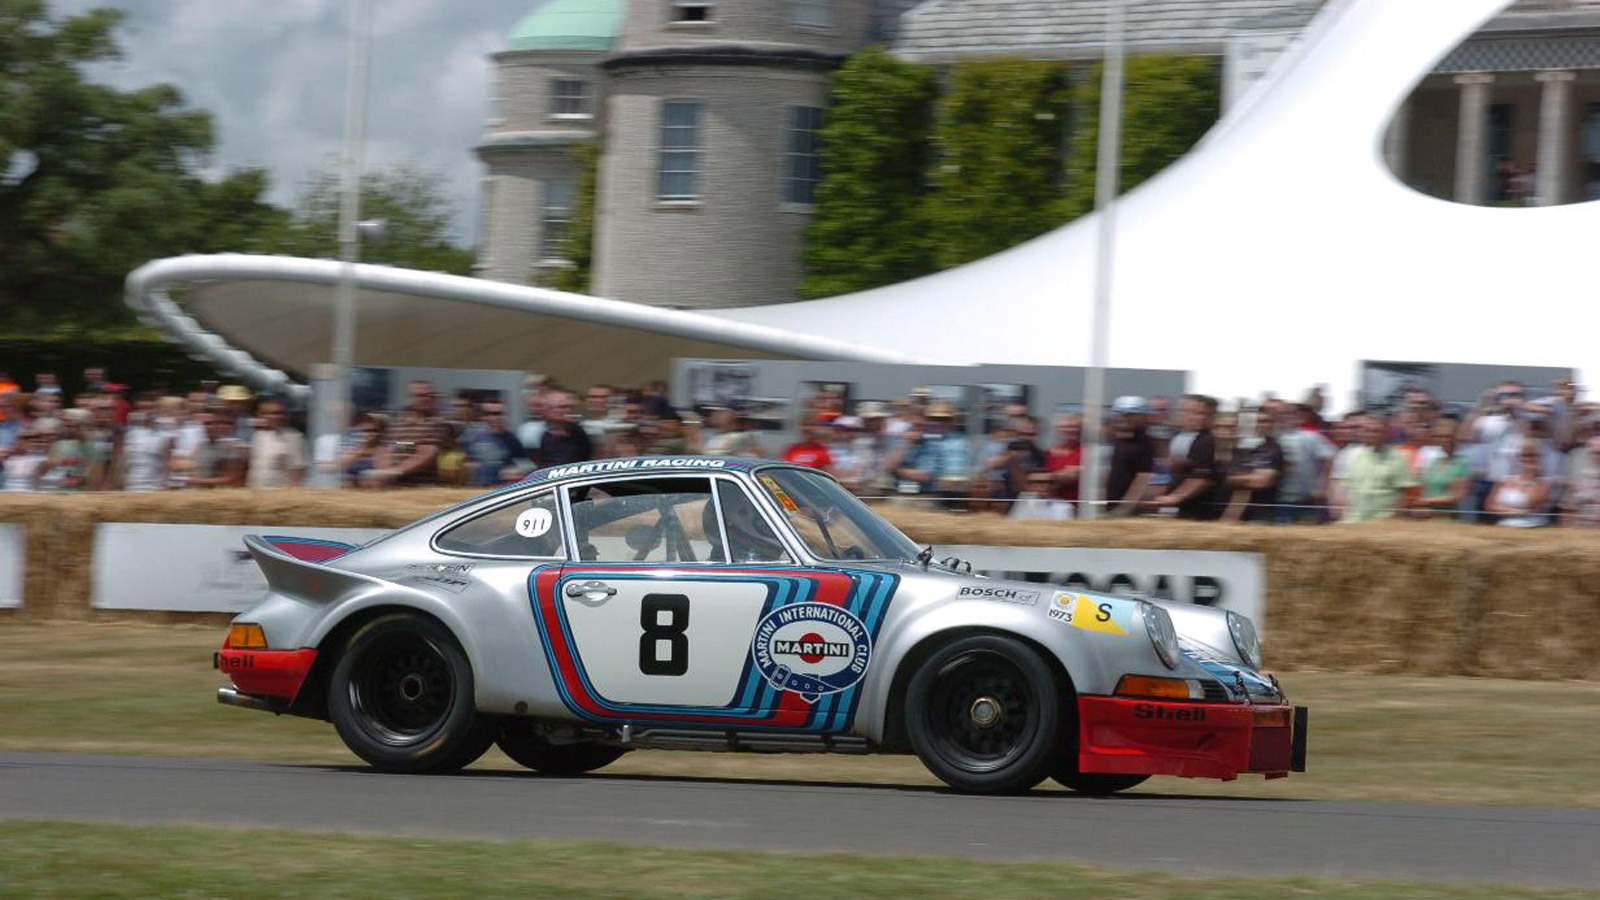 Historic Porsche 911s at the Goodwood Festival of Speed